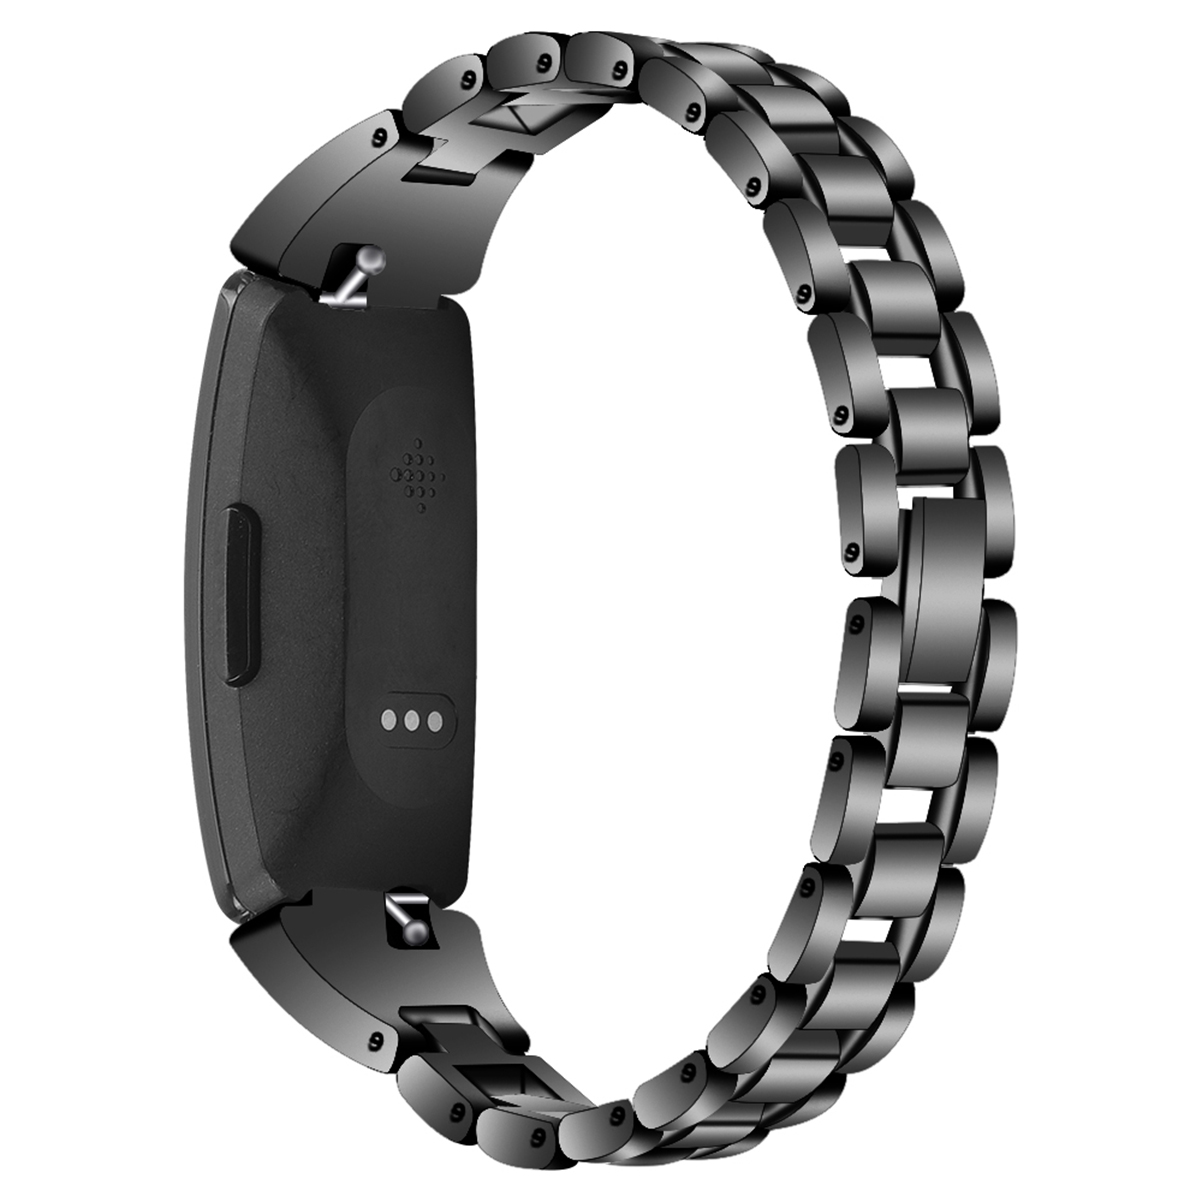 Bakeey-Watch-band-Stainless-Steel-Watch-Strap-For-Fitbit-InspireHR-1607091-9